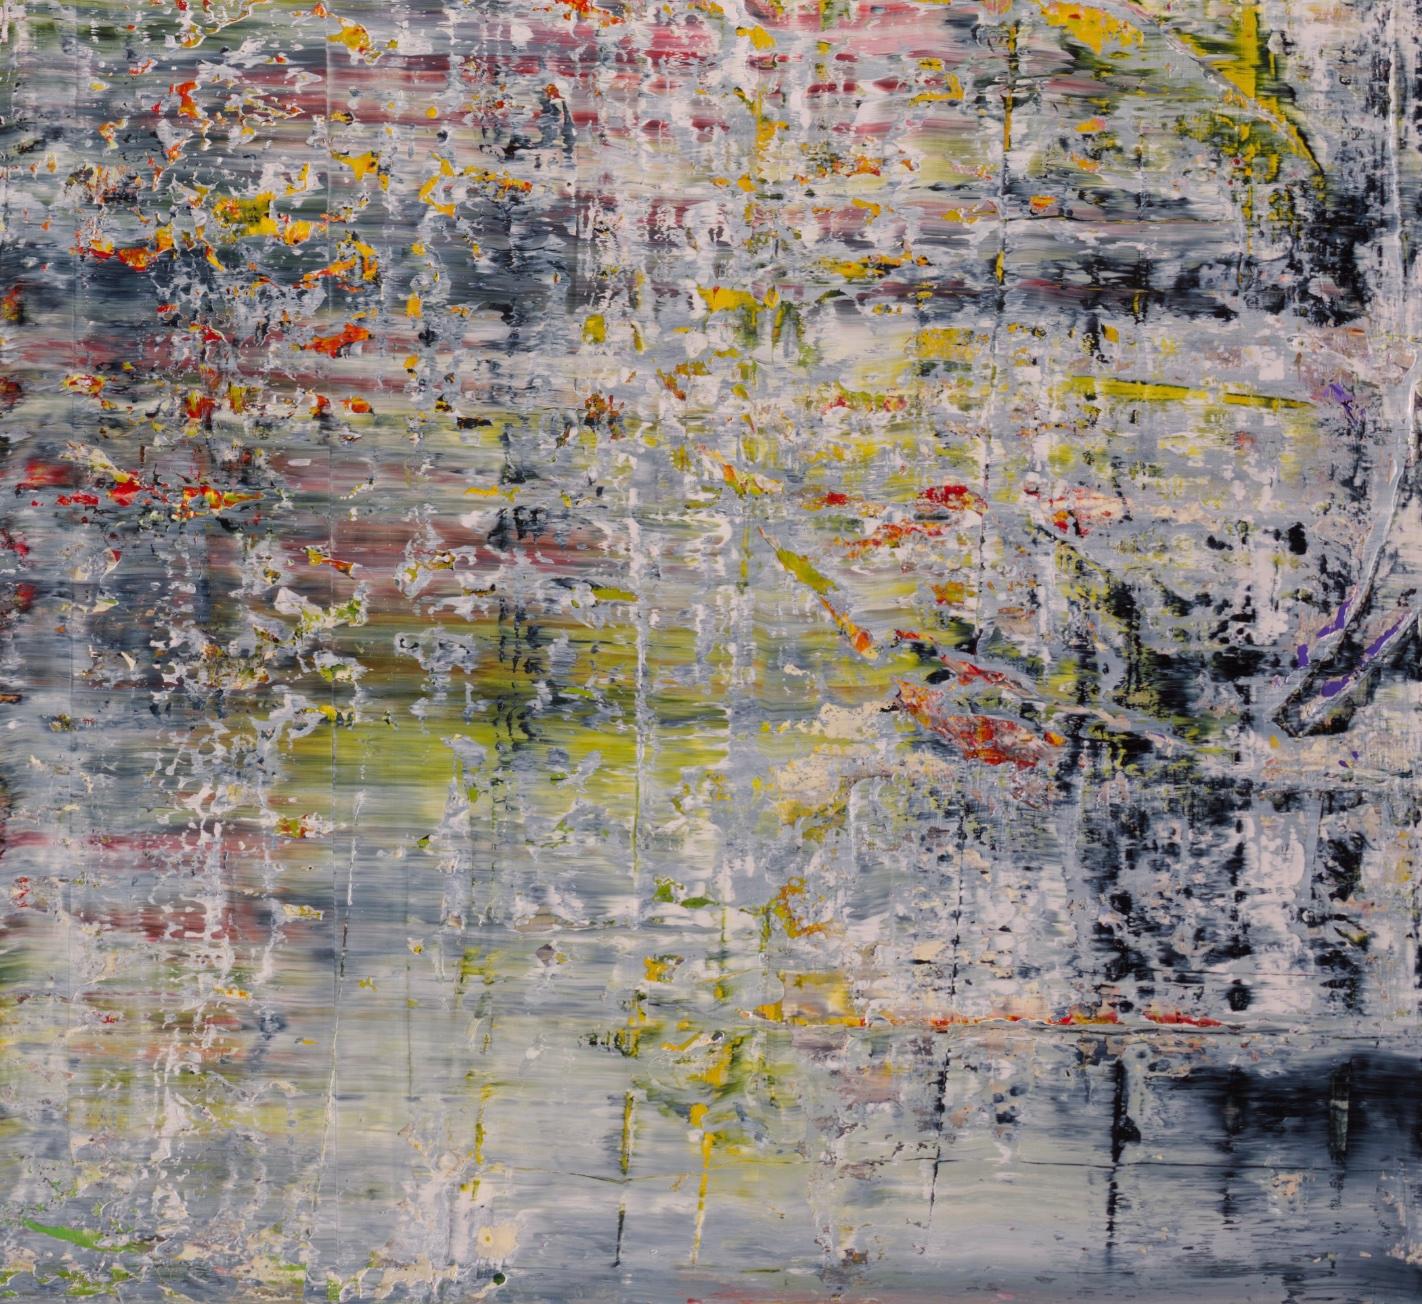 Merge #627 - Abstract Painting by Harry James Moody